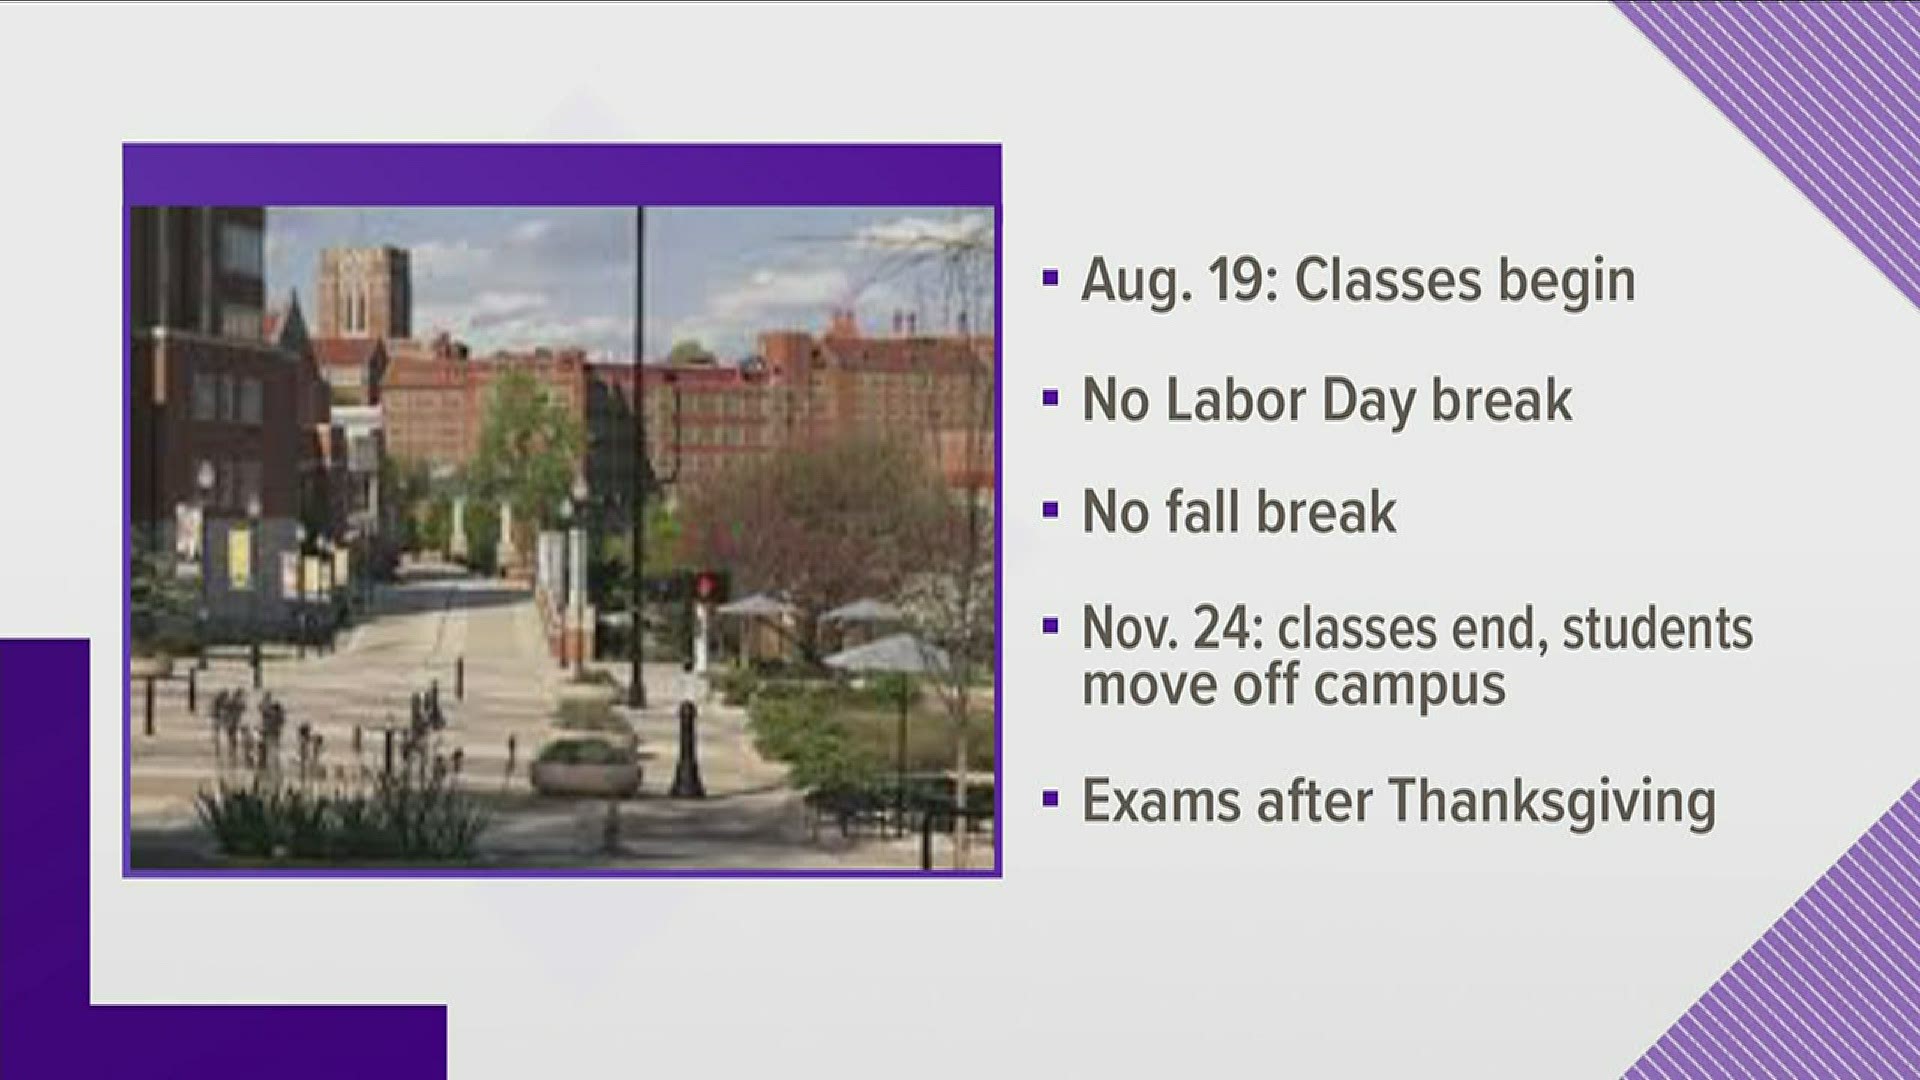 UT on Tuesday released calendar details about the fall semester amid virus concerns.